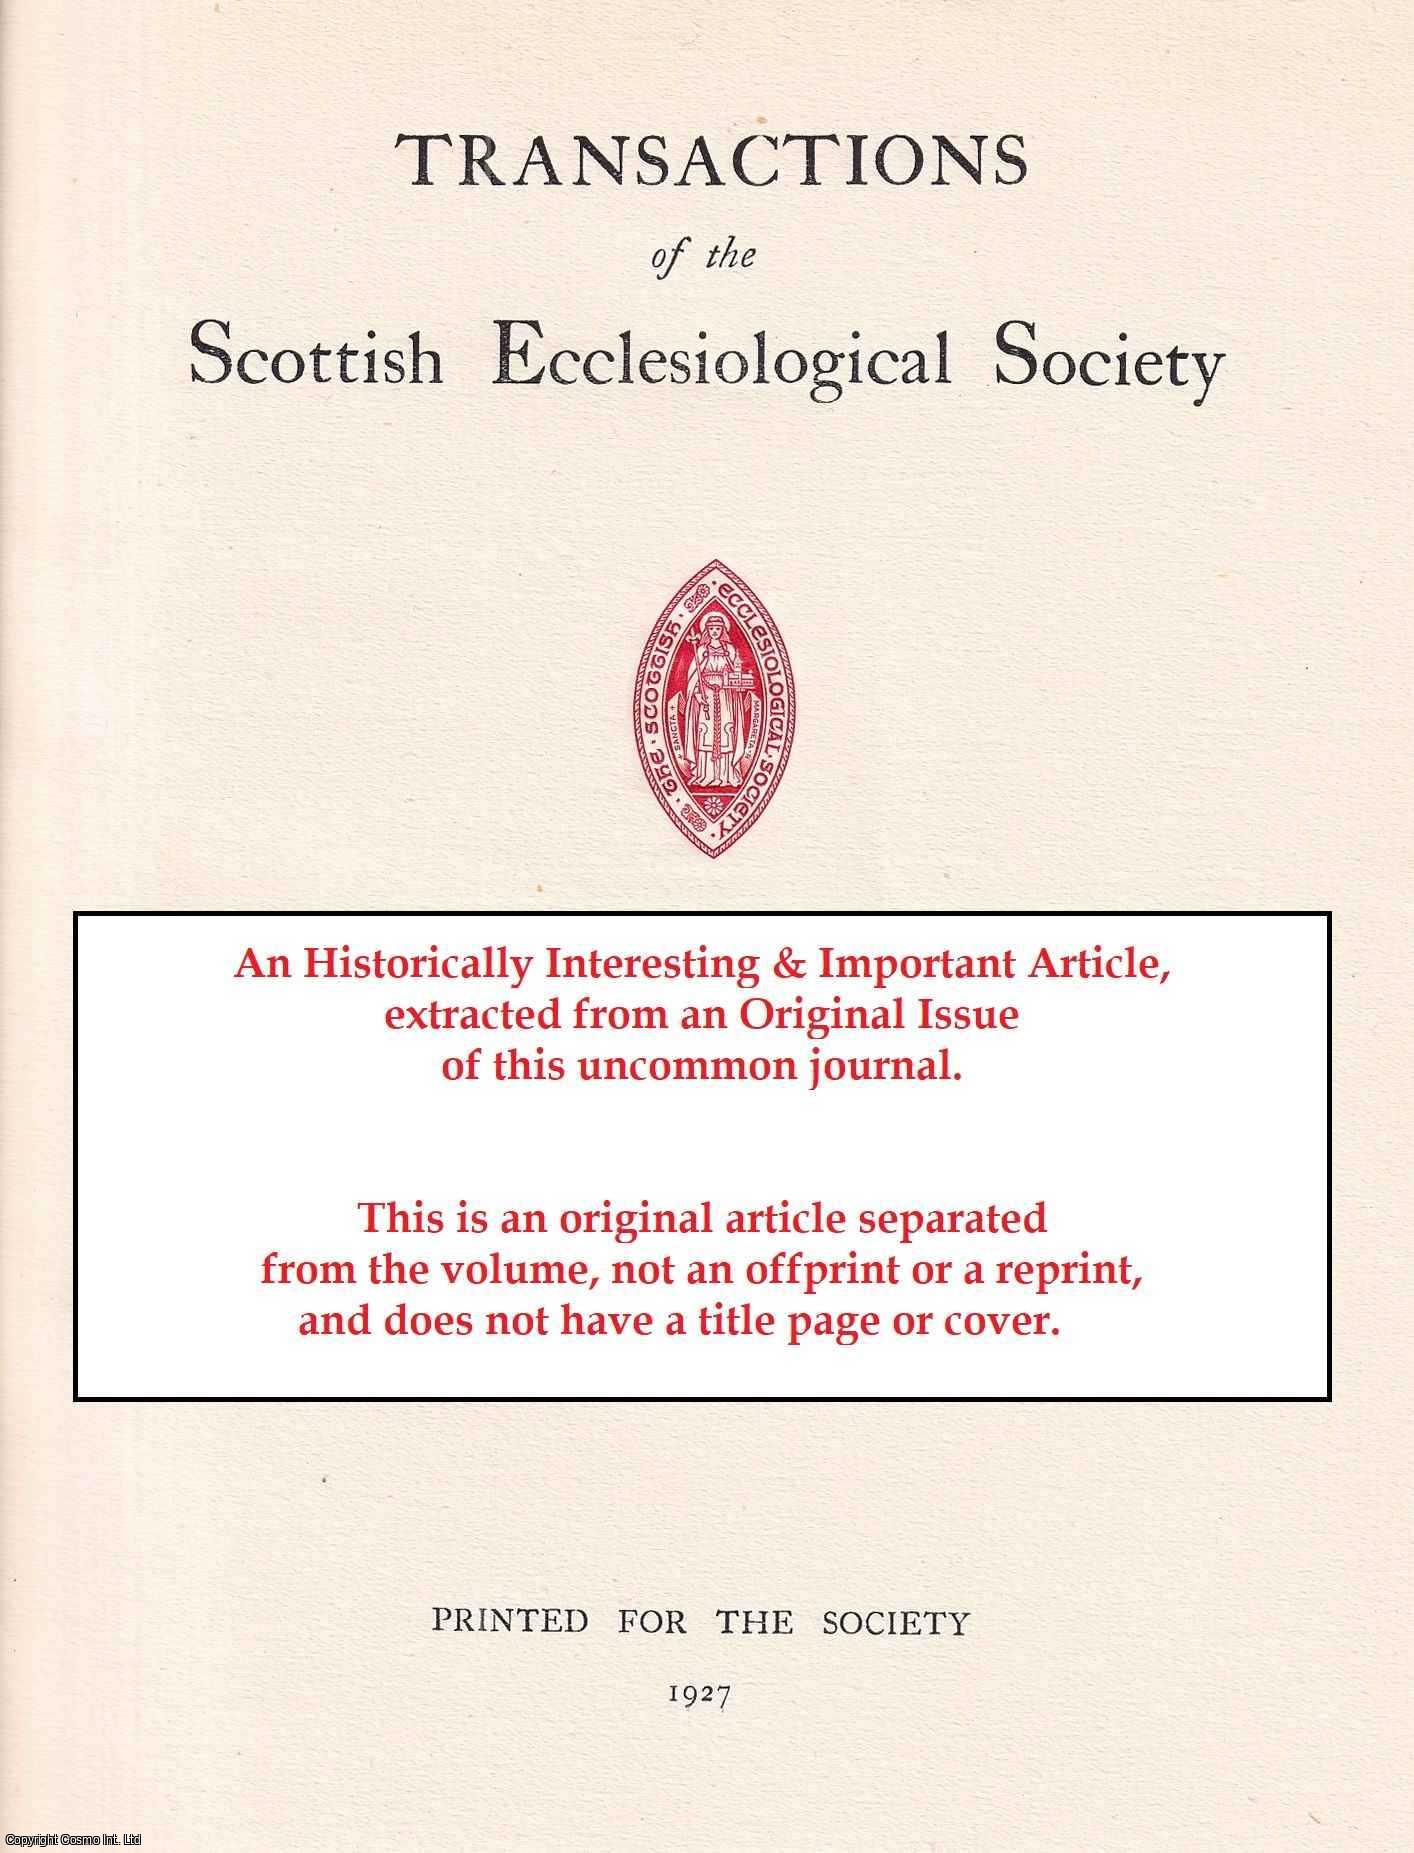 Various - Dunkeld, South Queensferry, Mid-Calder and Bothwell: Churches, Cathedrals Houses and Castles. An original article from the Transactions of the Scottish Ecclesiological Society, 1910.